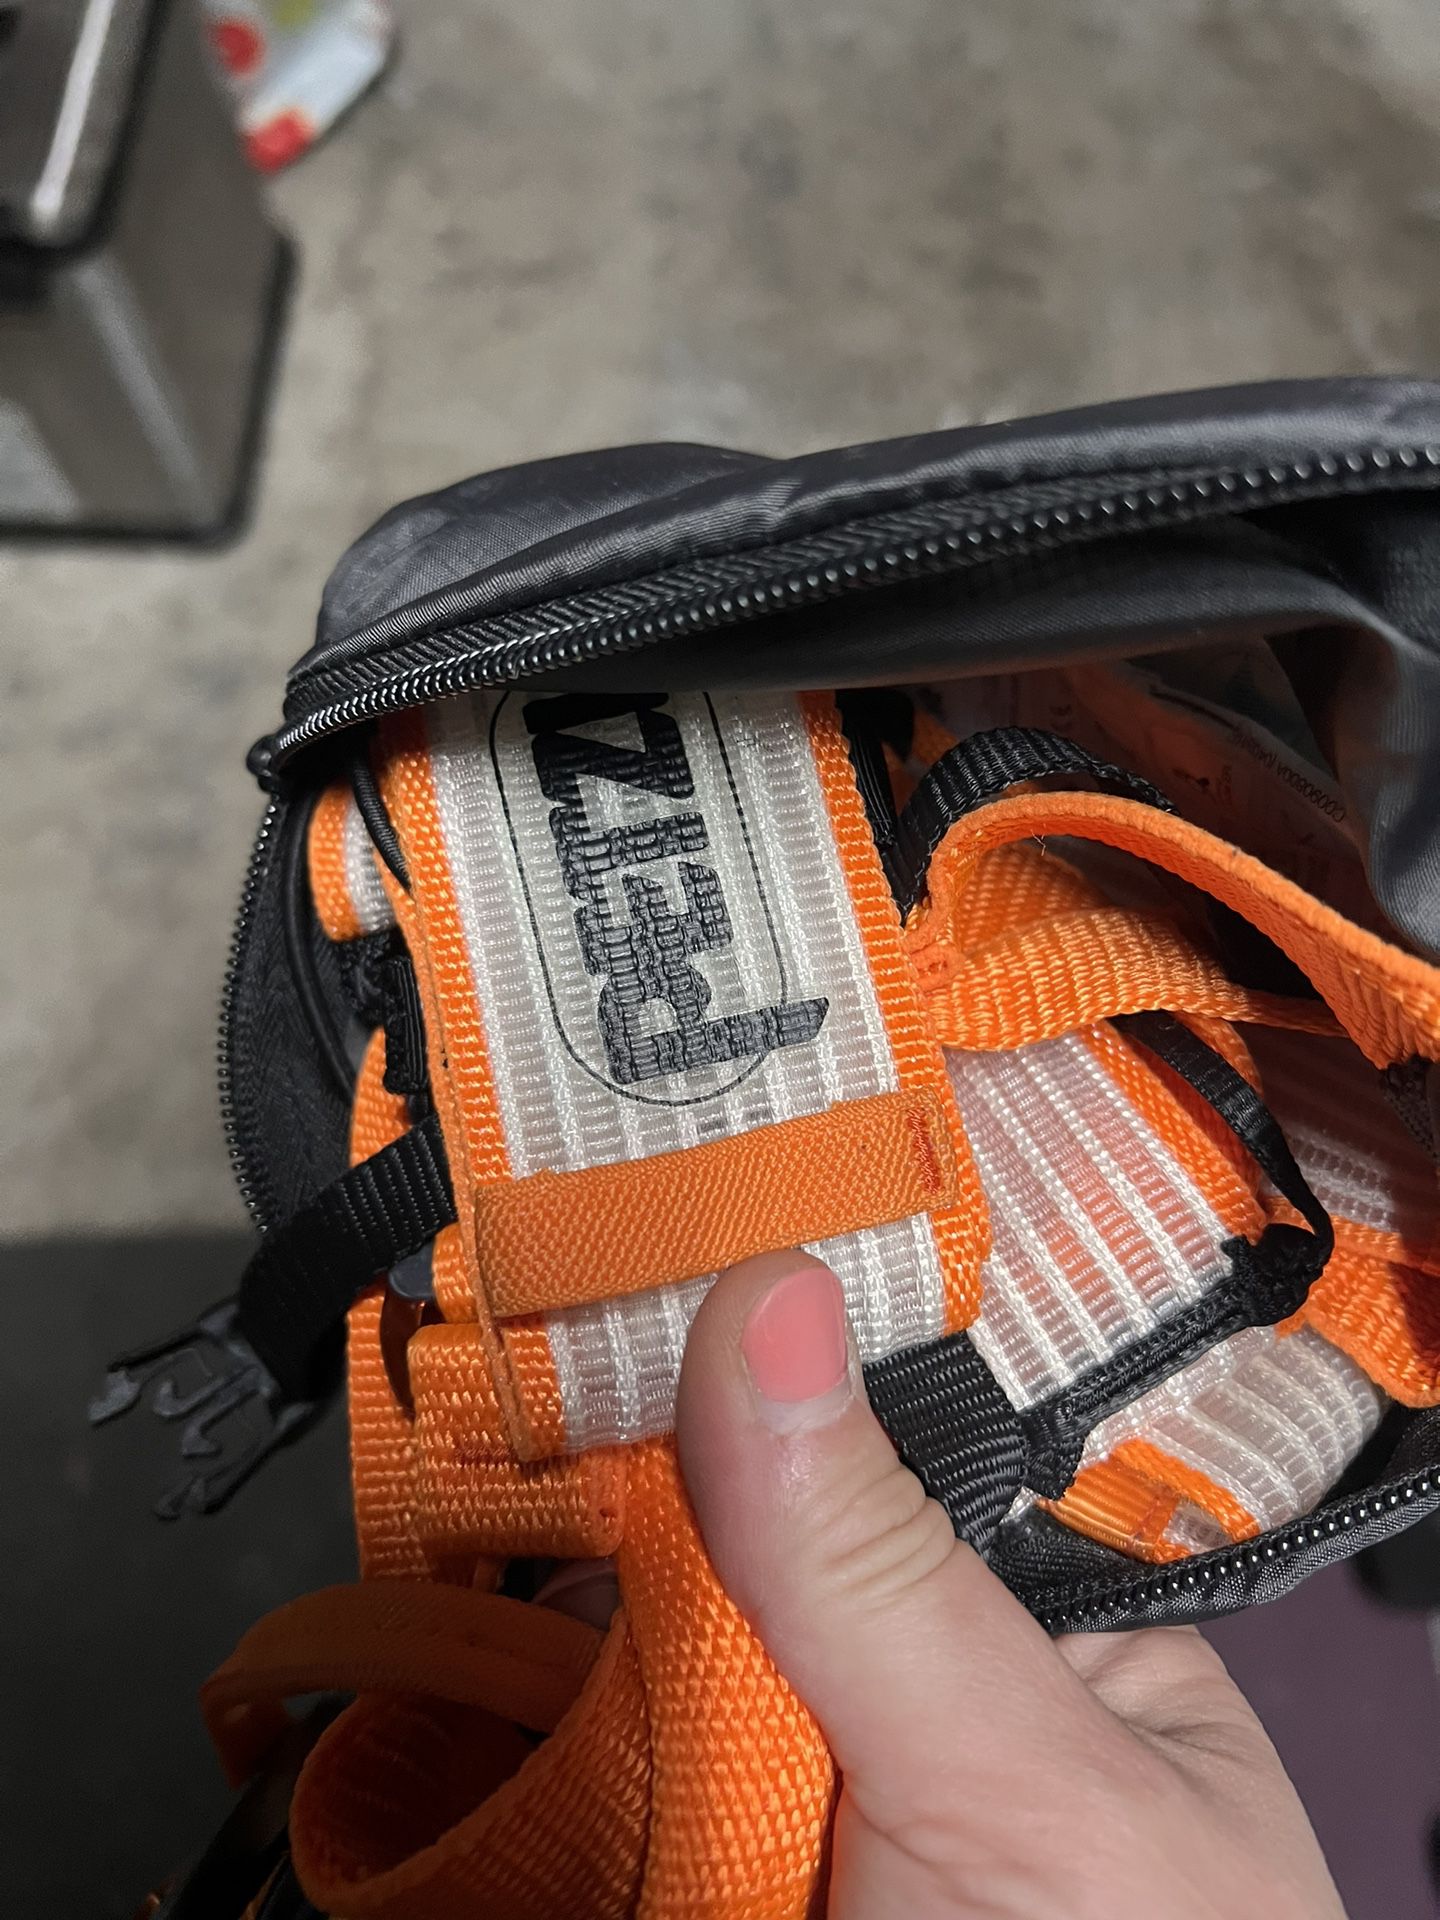 Petzl harness Only Used Once 